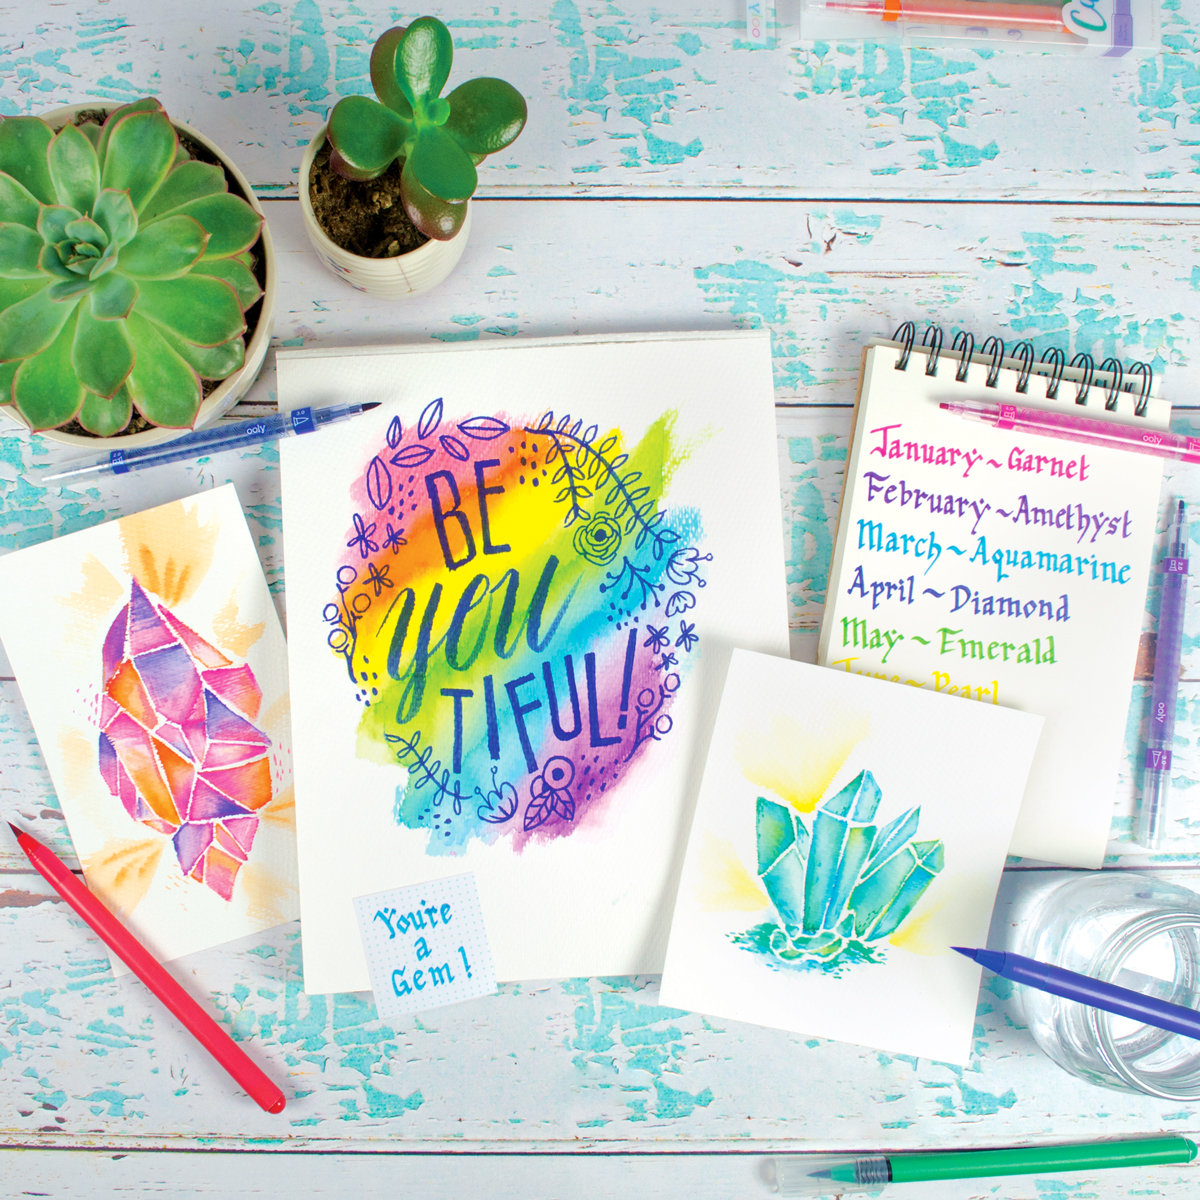 "Be-You-Tiful" words painted with watercolor on a Chroma Blends Watercolor Paper Pad